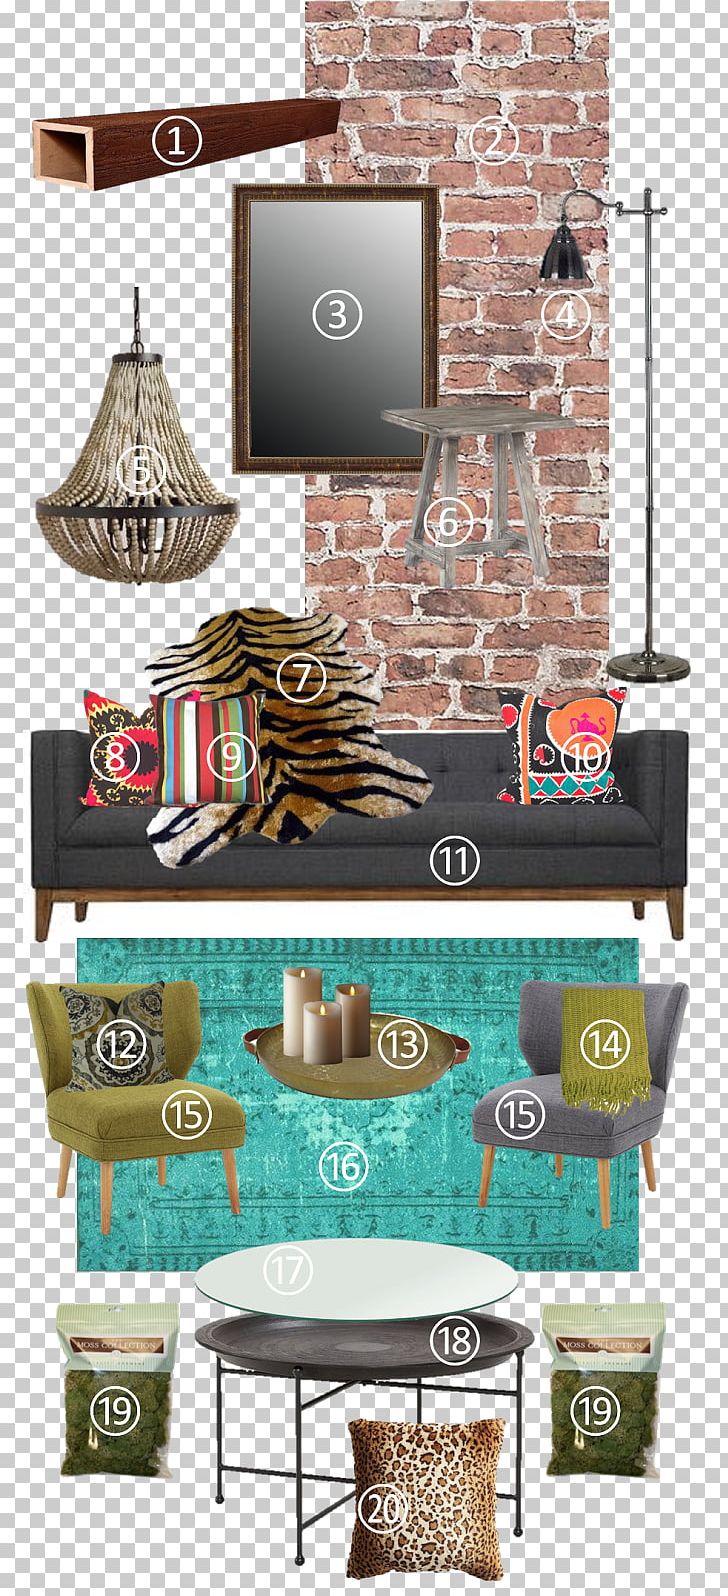 Table Boho-chic Living Room Fashion PNG, Clipart, Boho, Bohochic, Business, Color, Colorfulness Free PNG Download